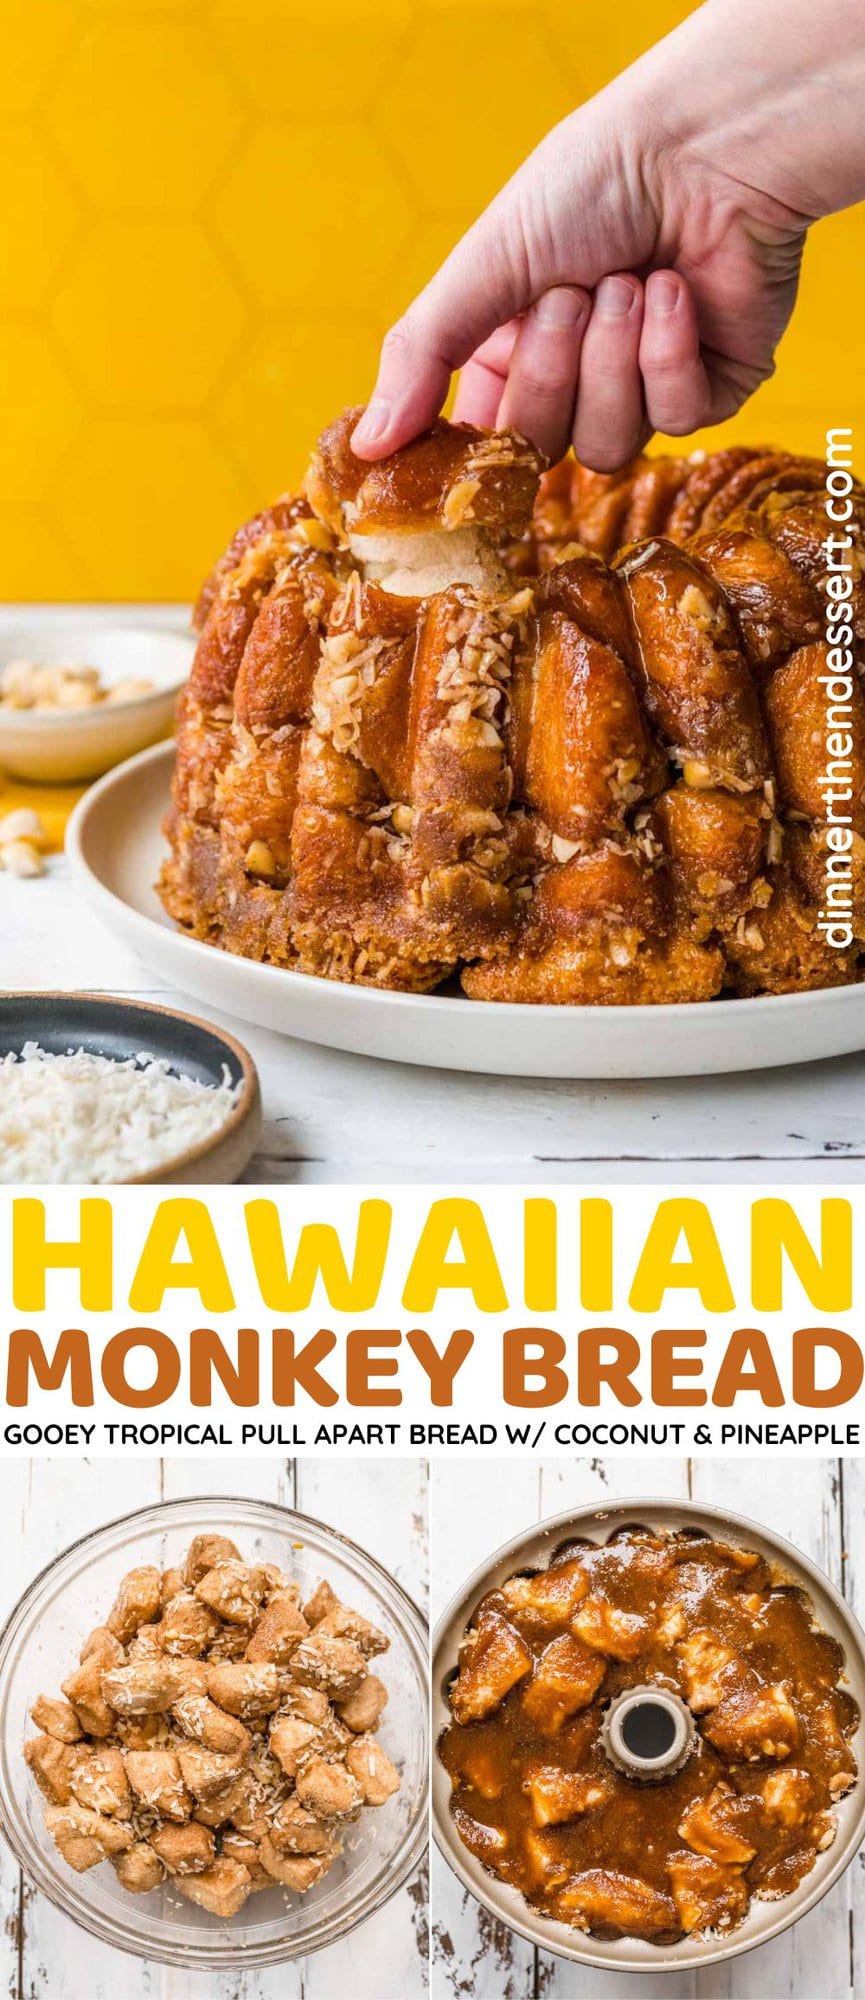 Hawaiian Monkey Bread finished on plate with coconut shreds and macadamia nuts in small bowls next to plate, hand pulling piece off top, and 2 panel preparation collage at bottom